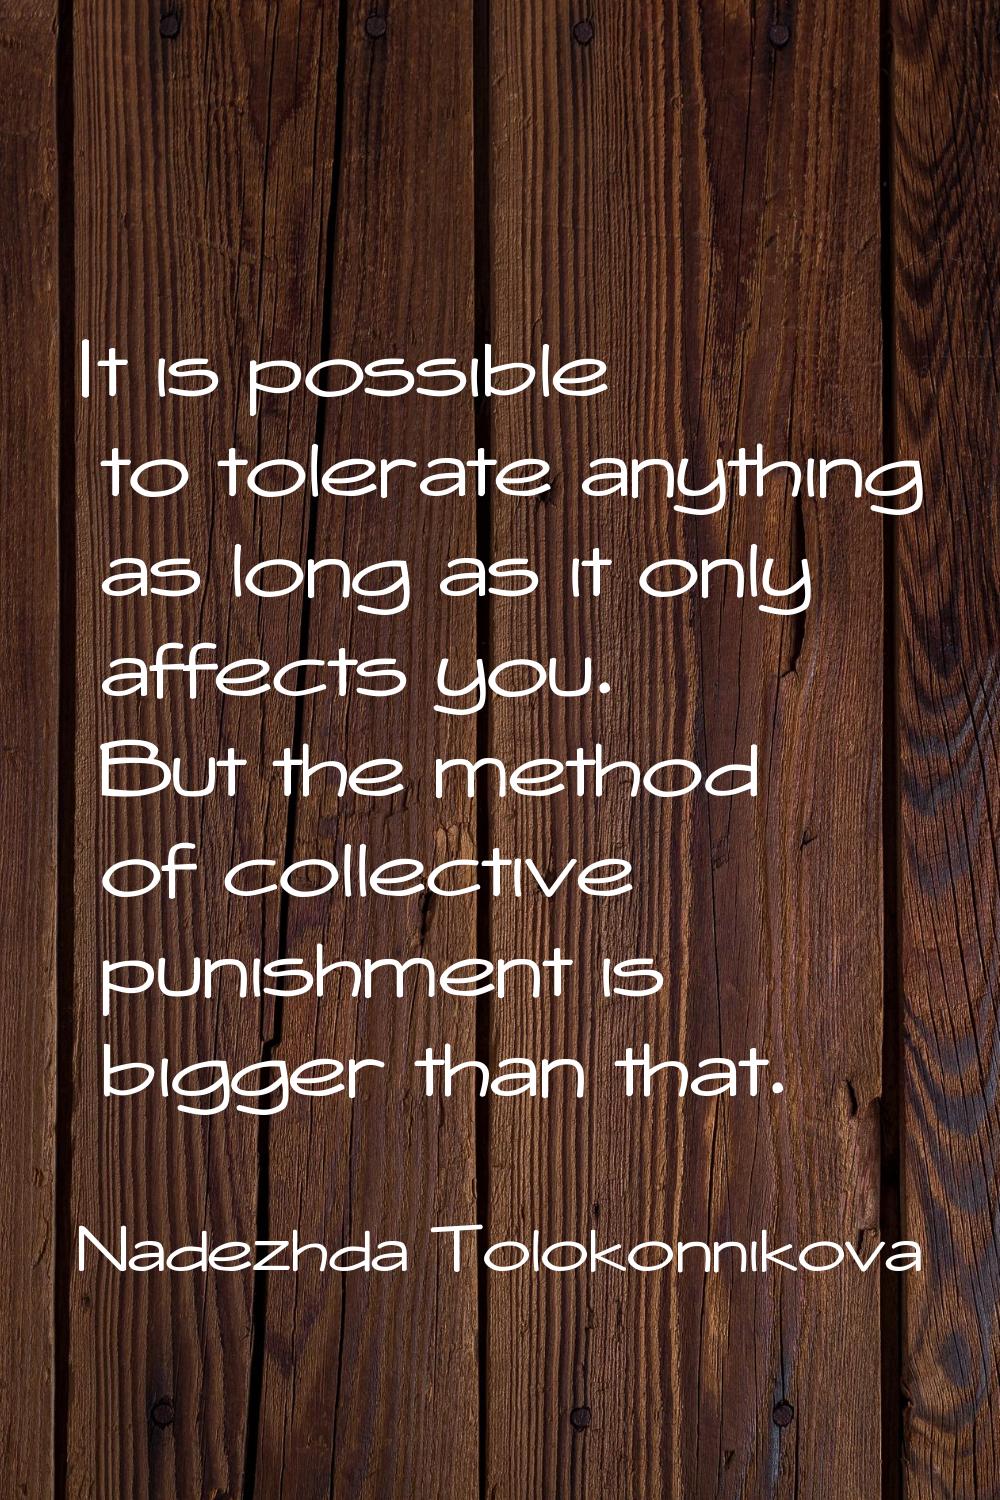 It is possible to tolerate anything as long as it only affects you. But the method of collective pu